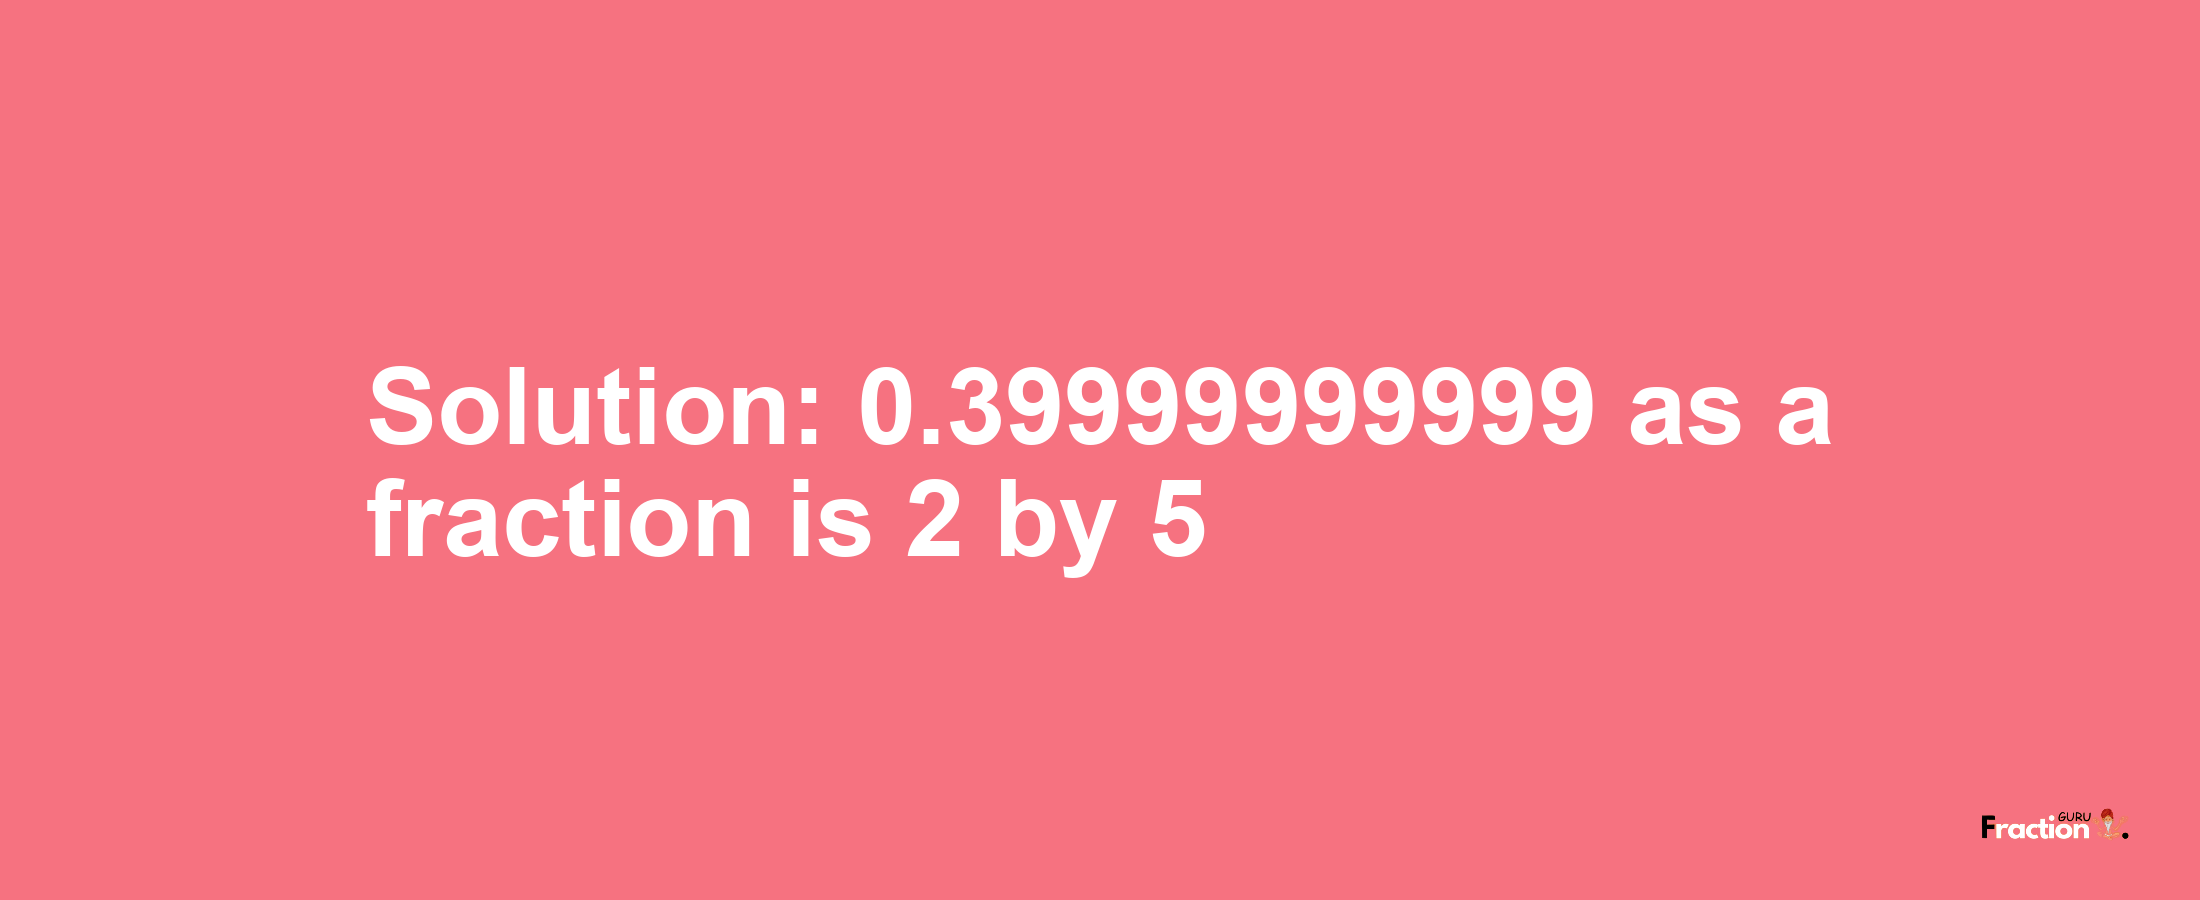 Solution:0.39999999999 as a fraction is 2/5